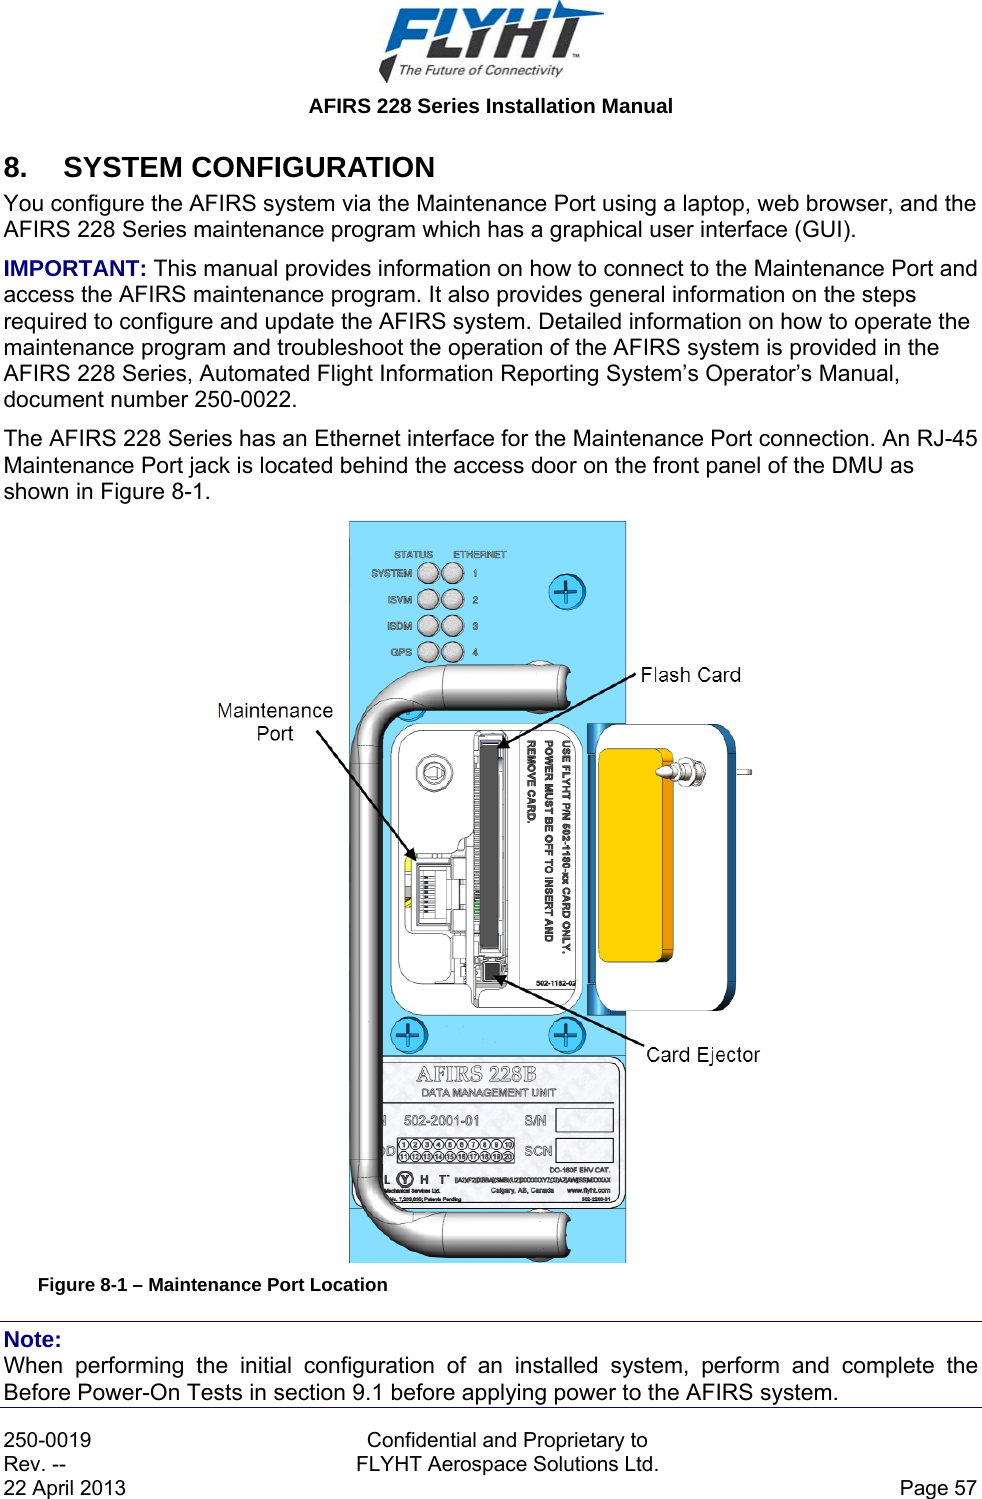  AFIRS 228 Series Installation Manual 250-0019  Confidential and Proprietary to Rev. --  FLYHT Aerospace Solutions Ltd. 22 April 2013    Page 57 8. SYSTEM CONFIGURATION You configure the AFIRS system via the Maintenance Port using a laptop, web browser, and the AFIRS 228 Series maintenance program which has a graphical user interface (GUI).  IMPORTANT: This manual provides information on how to connect to the Maintenance Port and access the AFIRS maintenance program. It also provides general information on the steps required to configure and update the AFIRS system. Detailed information on how to operate the maintenance program and troubleshoot the operation of the AFIRS system is provided in the AFIRS 228 Series, Automated Flight Information Reporting System’s Operator’s Manual, document number 250-0022. The AFIRS 228 Series has an Ethernet interface for the Maintenance Port connection. An RJ-45 Maintenance Port jack is located behind the access door on the front panel of the DMU as shown in Figure 8-1.  Figure 8-1 – Maintenance Port Location Note: When performing the initial configuration of an installed system, perform and complete the Before Power-On Tests in section 9.1 before applying power to the AFIRS system. 